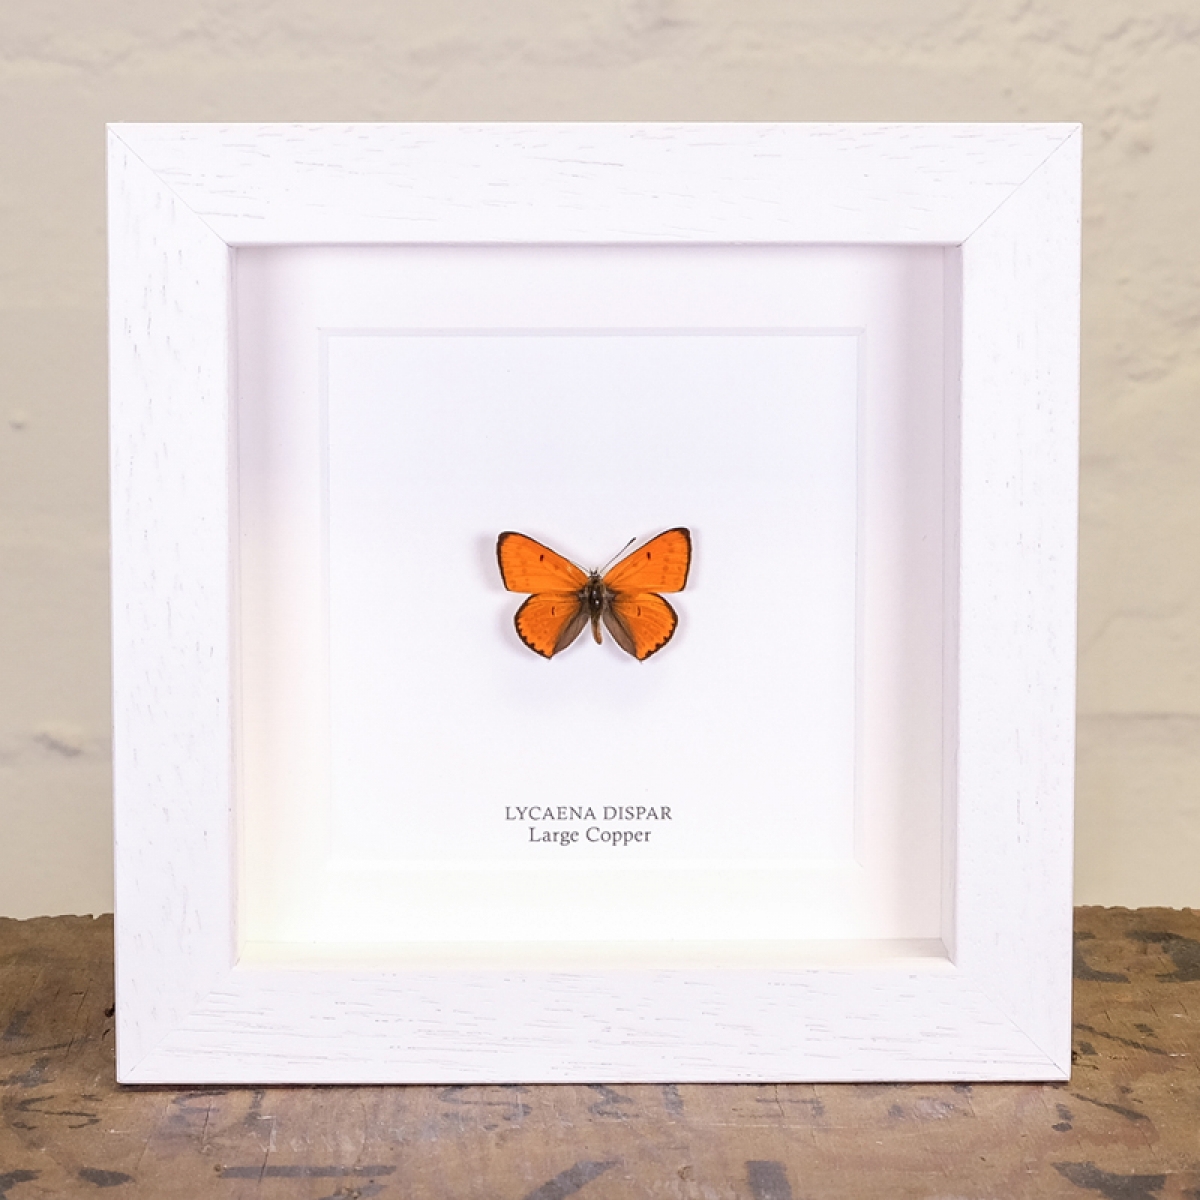 The Large Copper Butterfly in Box Frame (Lycaena dispar)